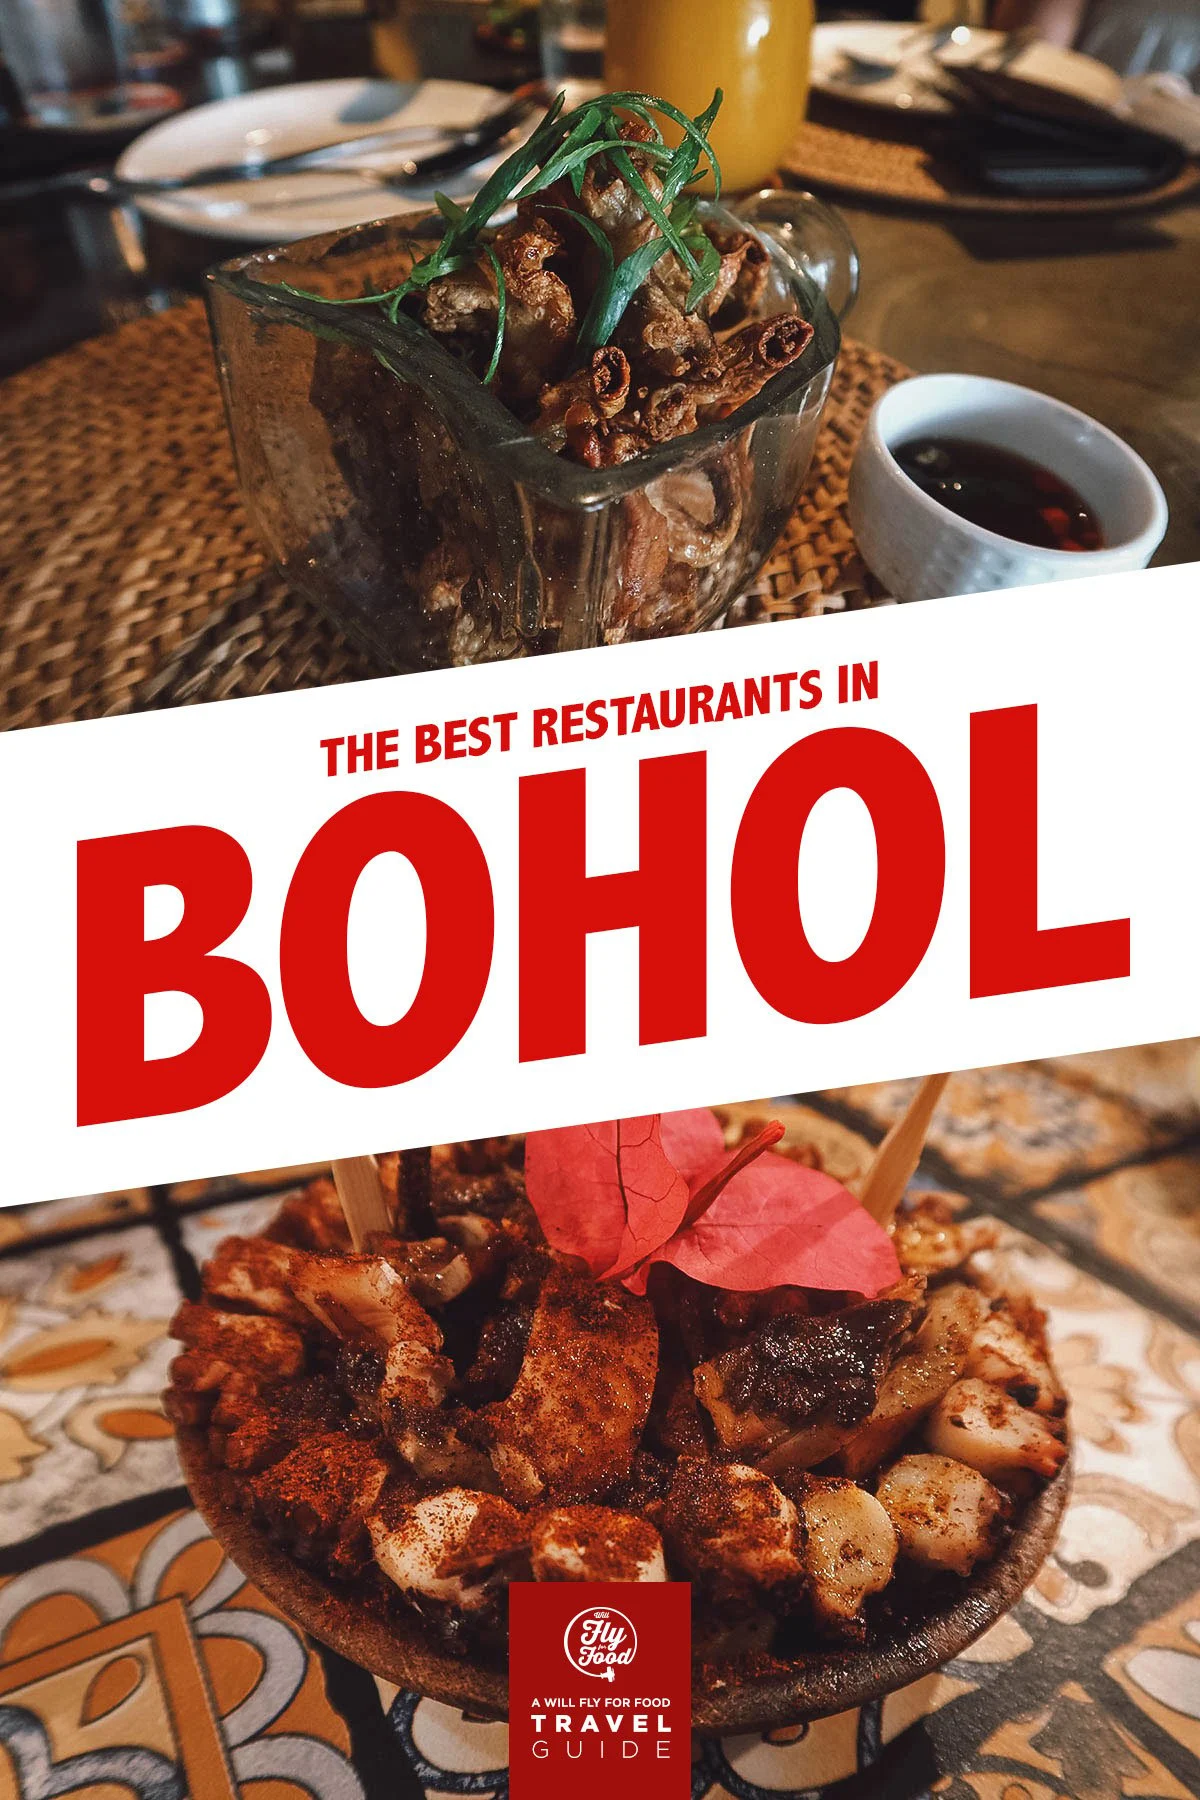 Dishes from restaurants in Bohol, Philippines